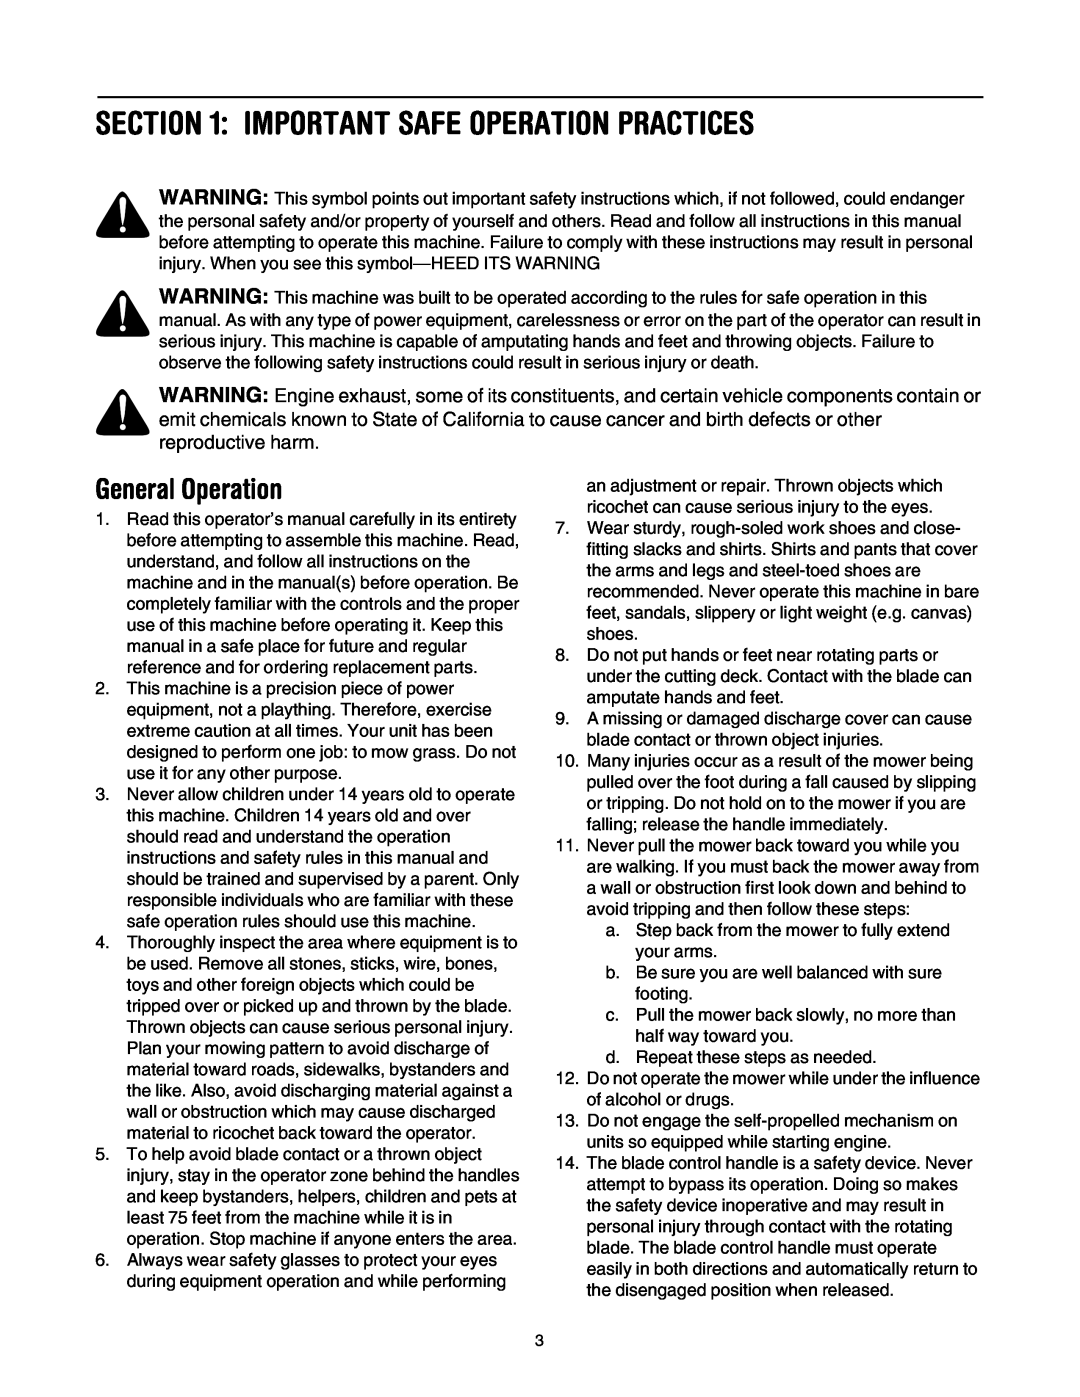 MTD 549 manual Important Safe Operation Practices, General Operation 